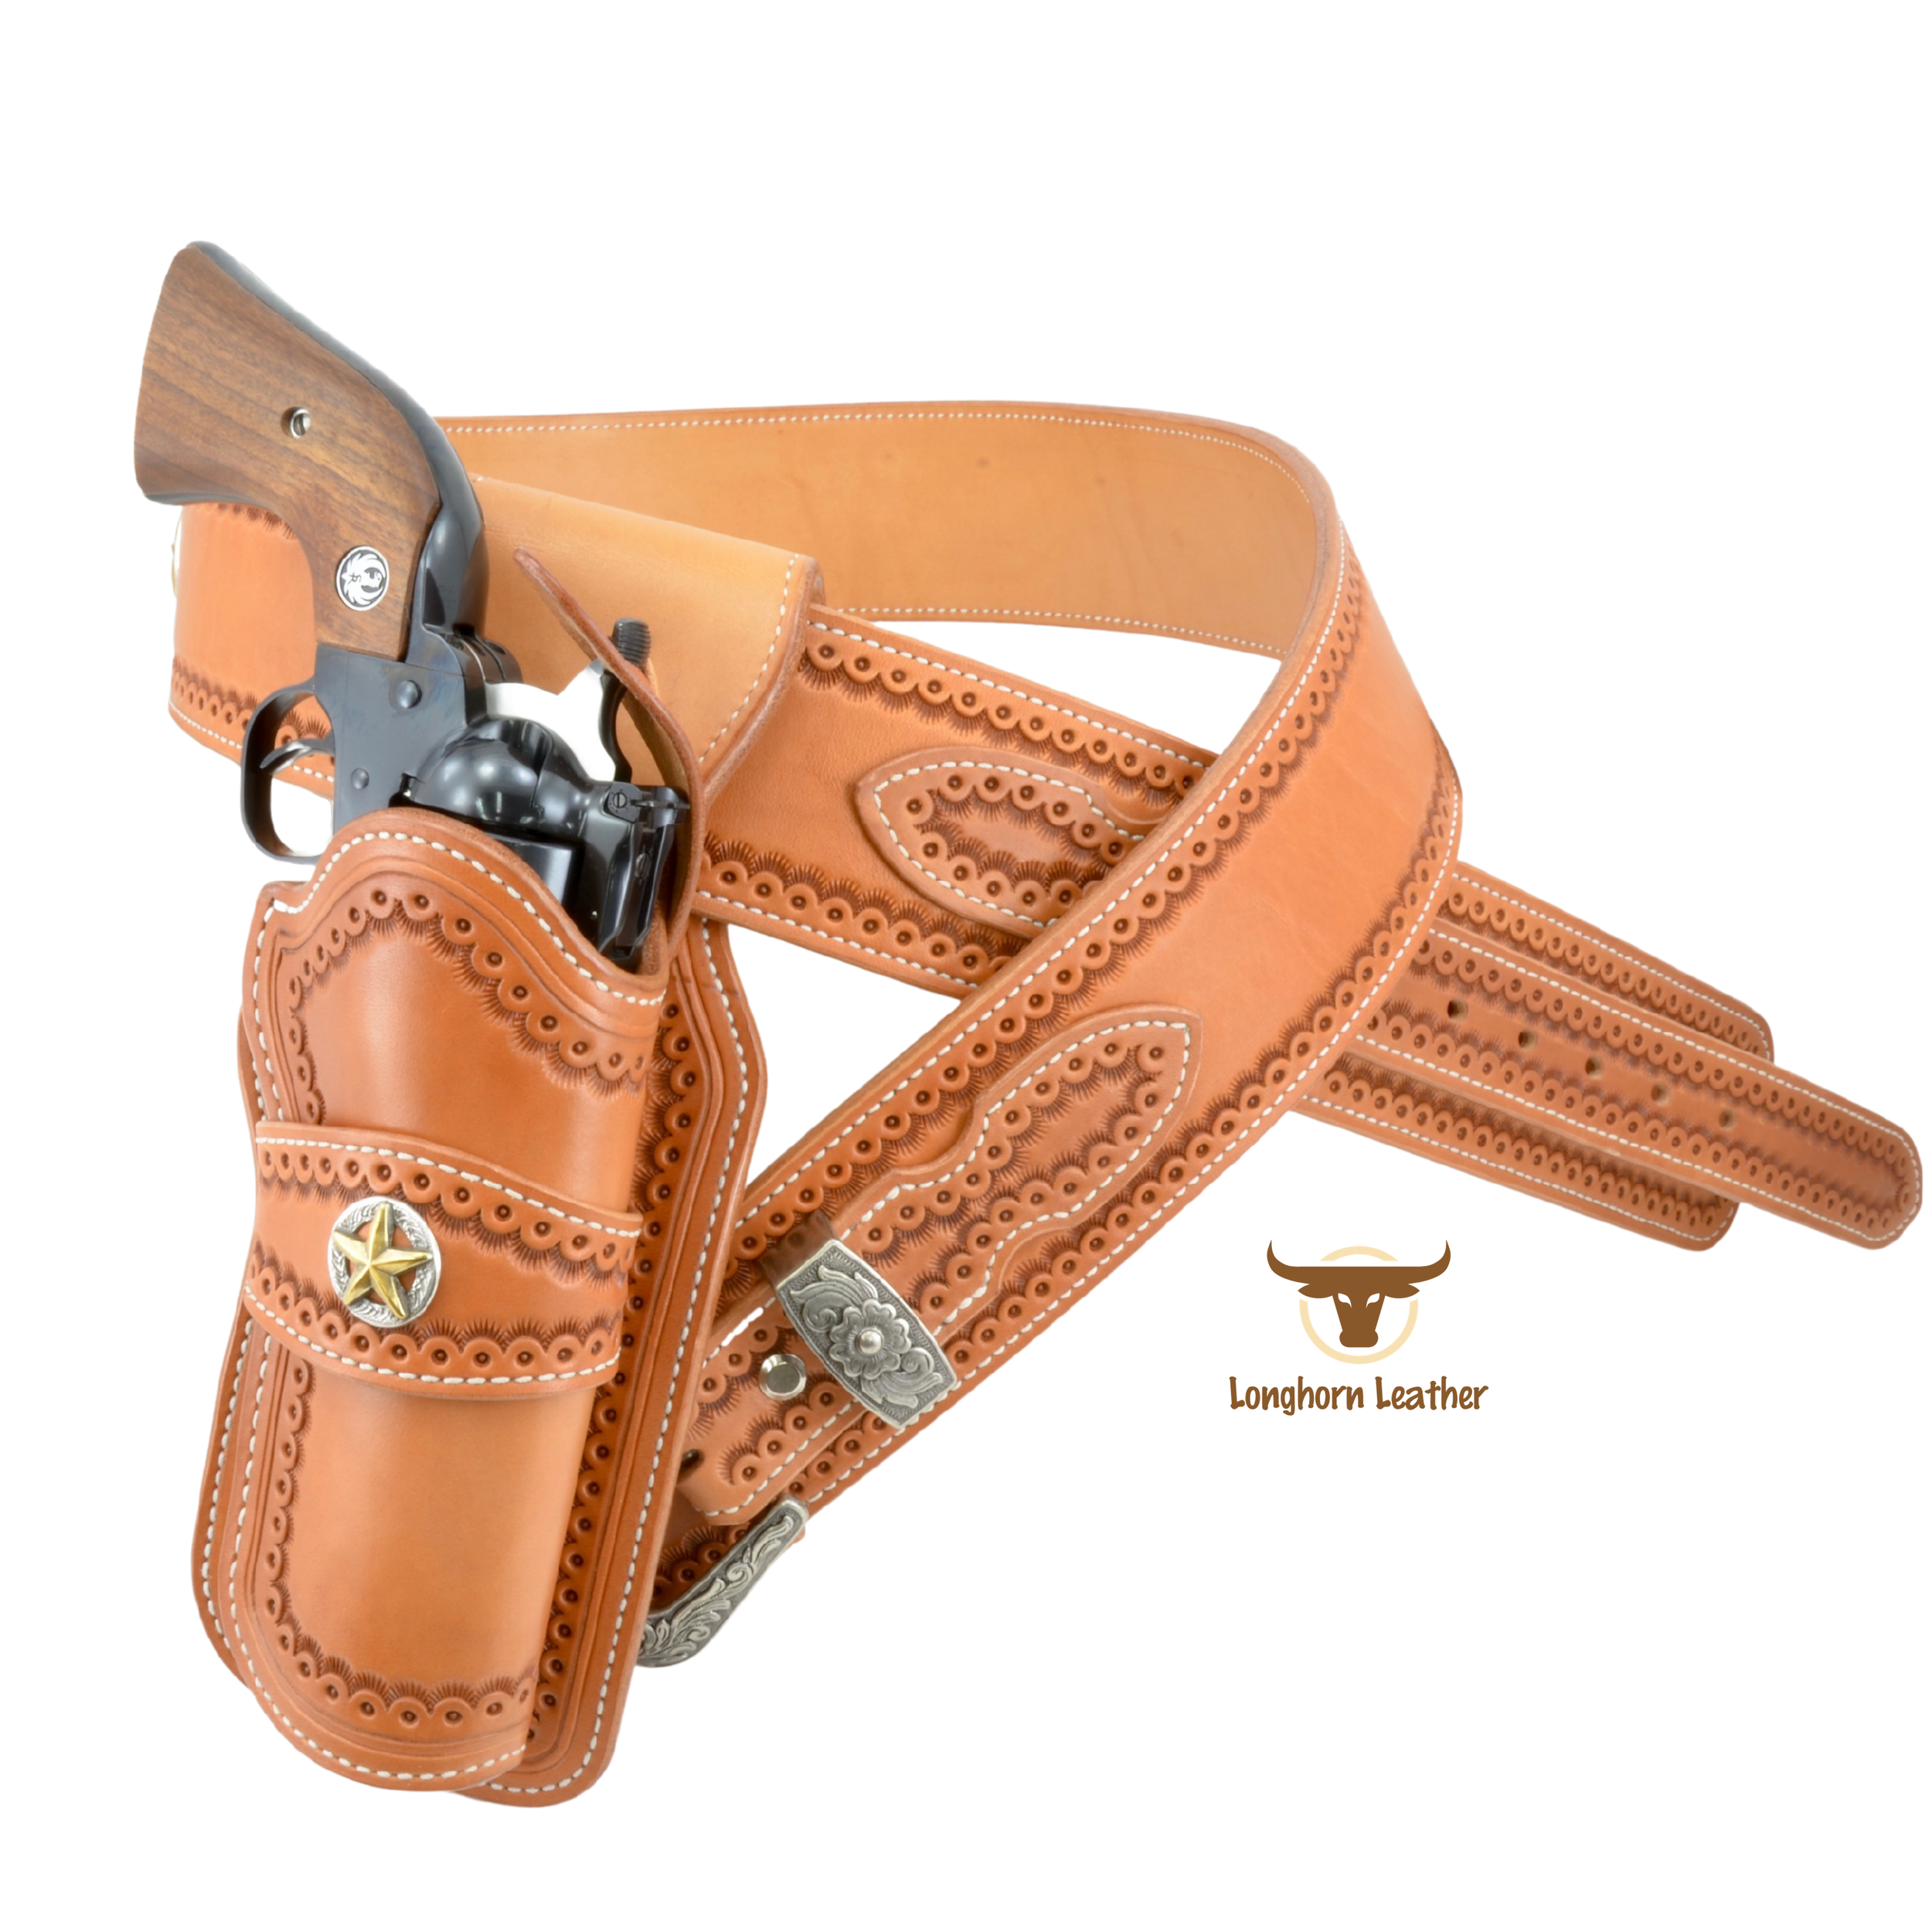 Custom leather single action holster and western style cartridge belt featuring the "Cimarron" design.  Individually handcrafted at Longhorn Leather AZ.